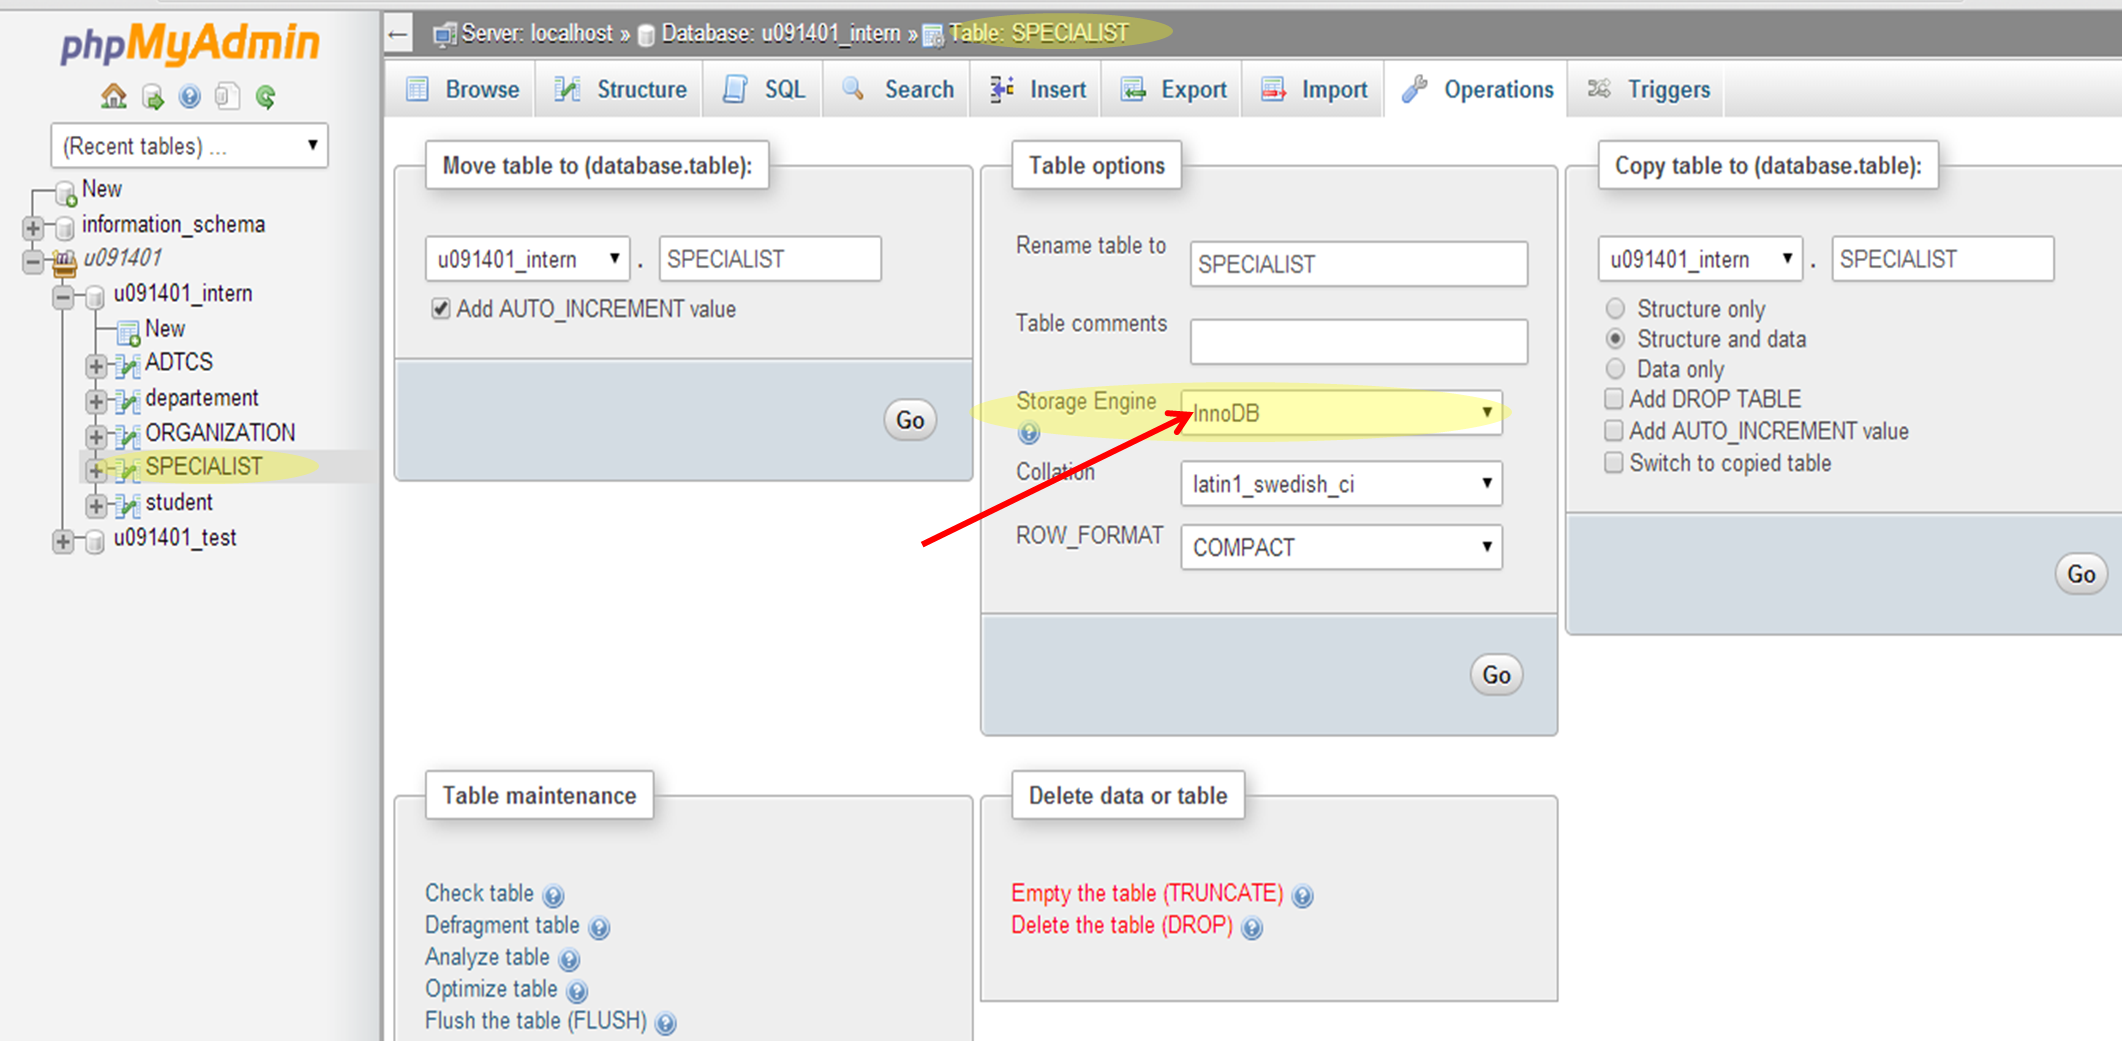 How To Enable Relation View In Phpmyadmin - Stack Overflow